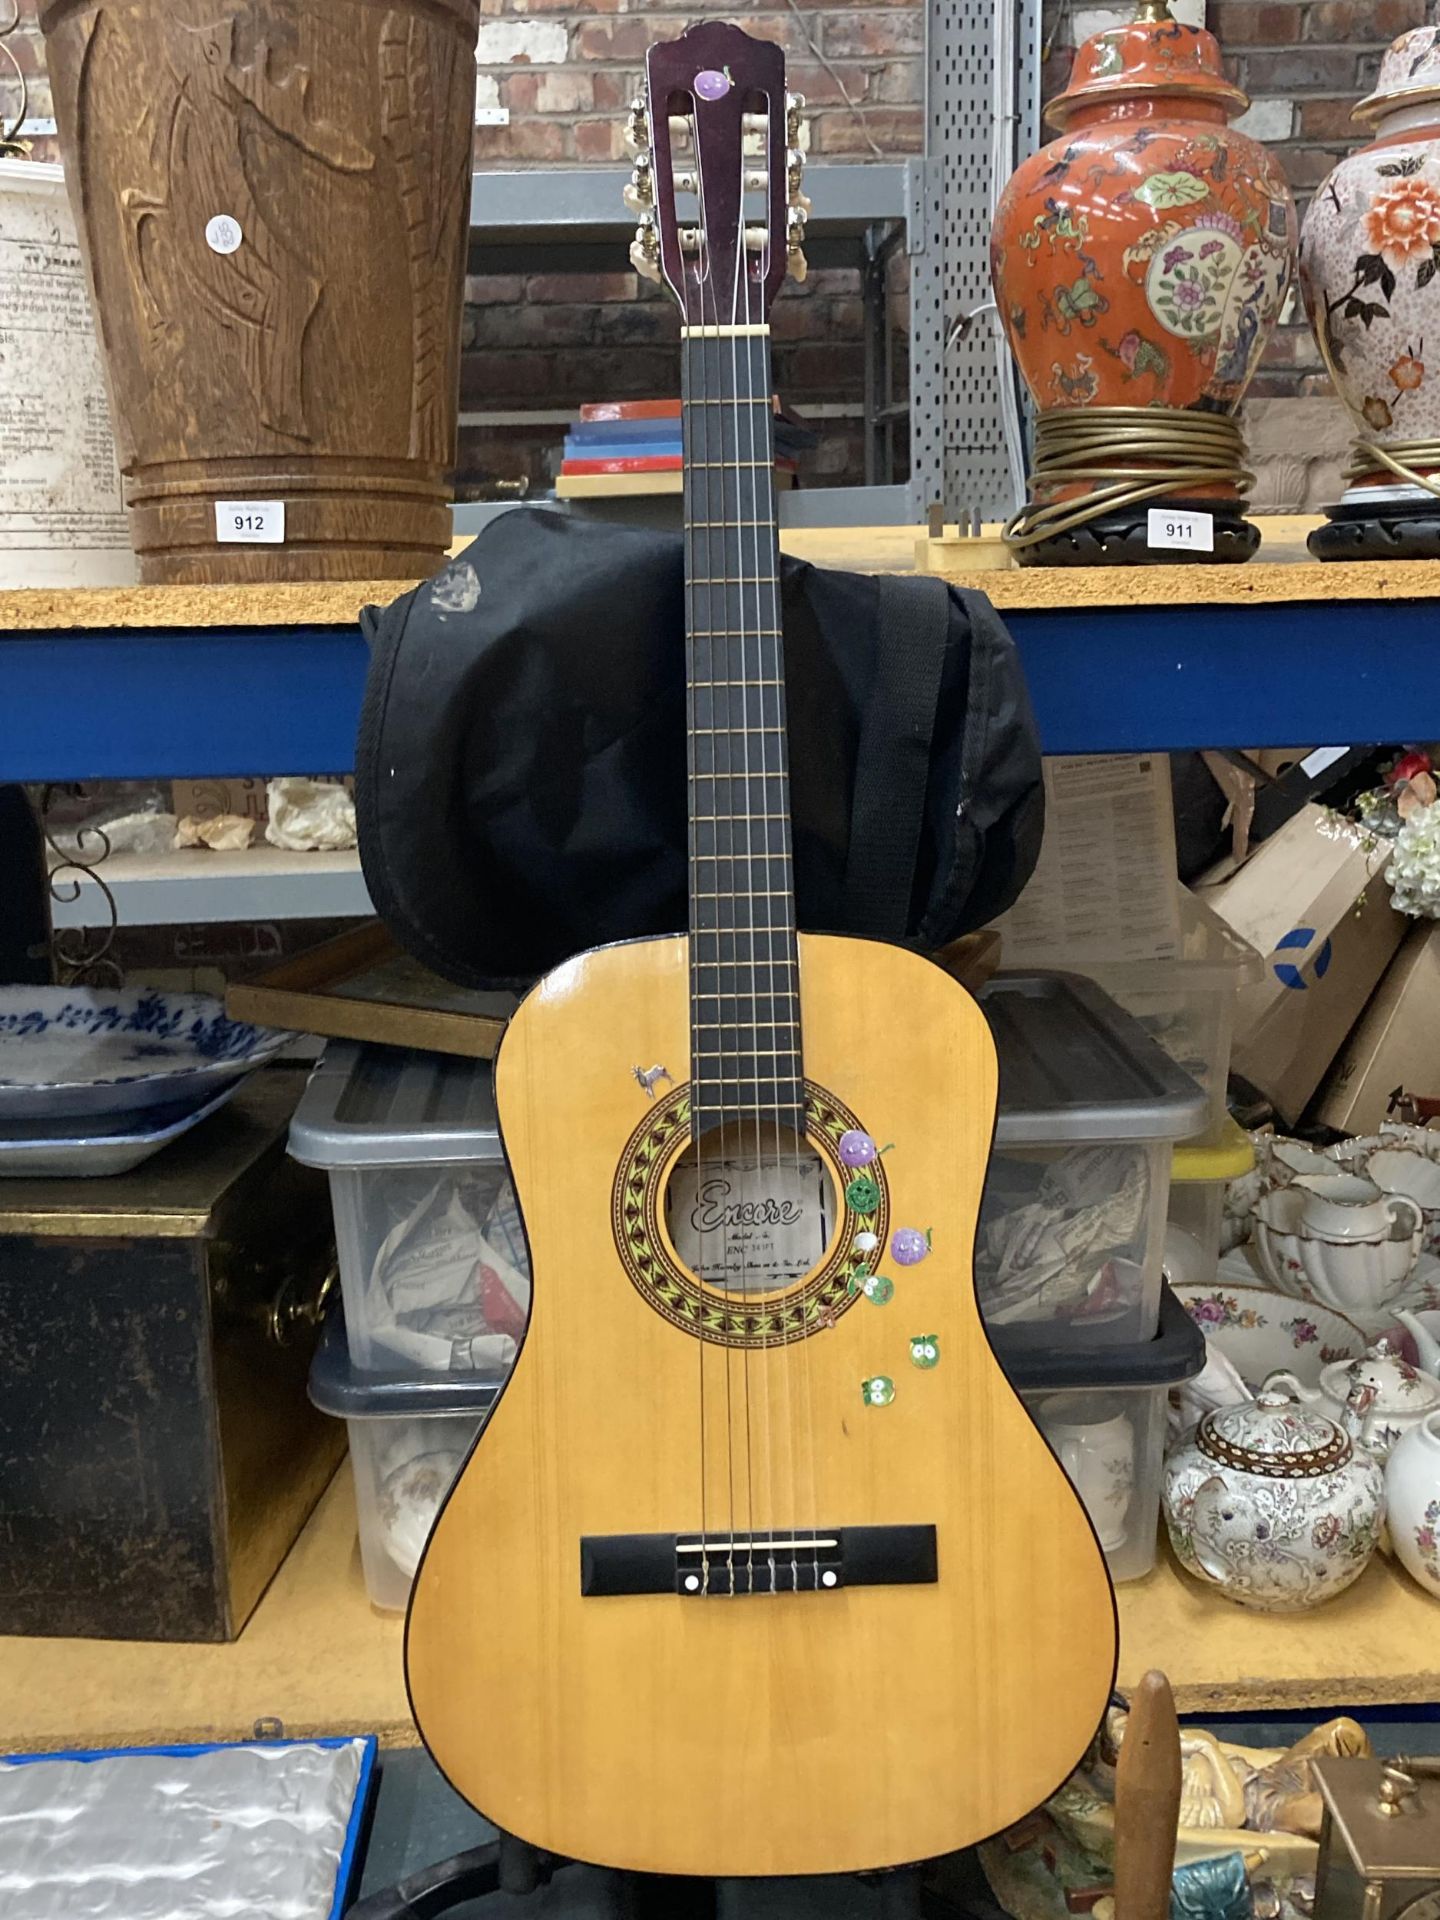 AN ENCORE CHILD'S ACOUSTIC GUITAR WITH STAND AND CASE